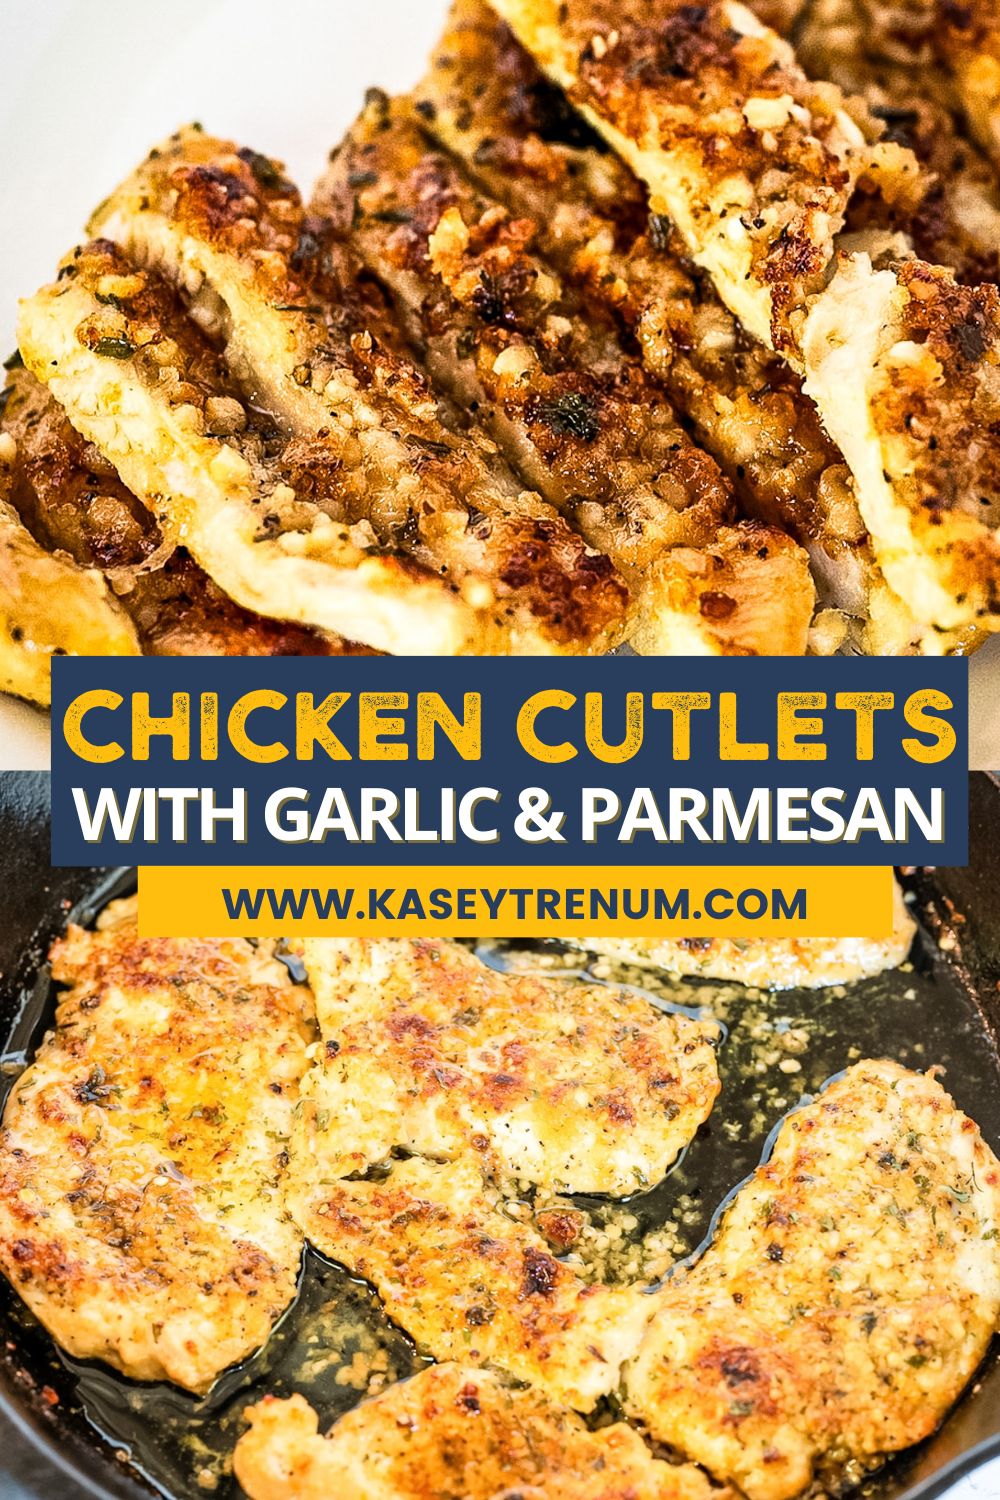 Collage of Garlic Parmesan Chicken Cutlets cooked in the oven, featuring the skillet and a sliced serving on a white plate, with a blue banner containing white and yellow text.